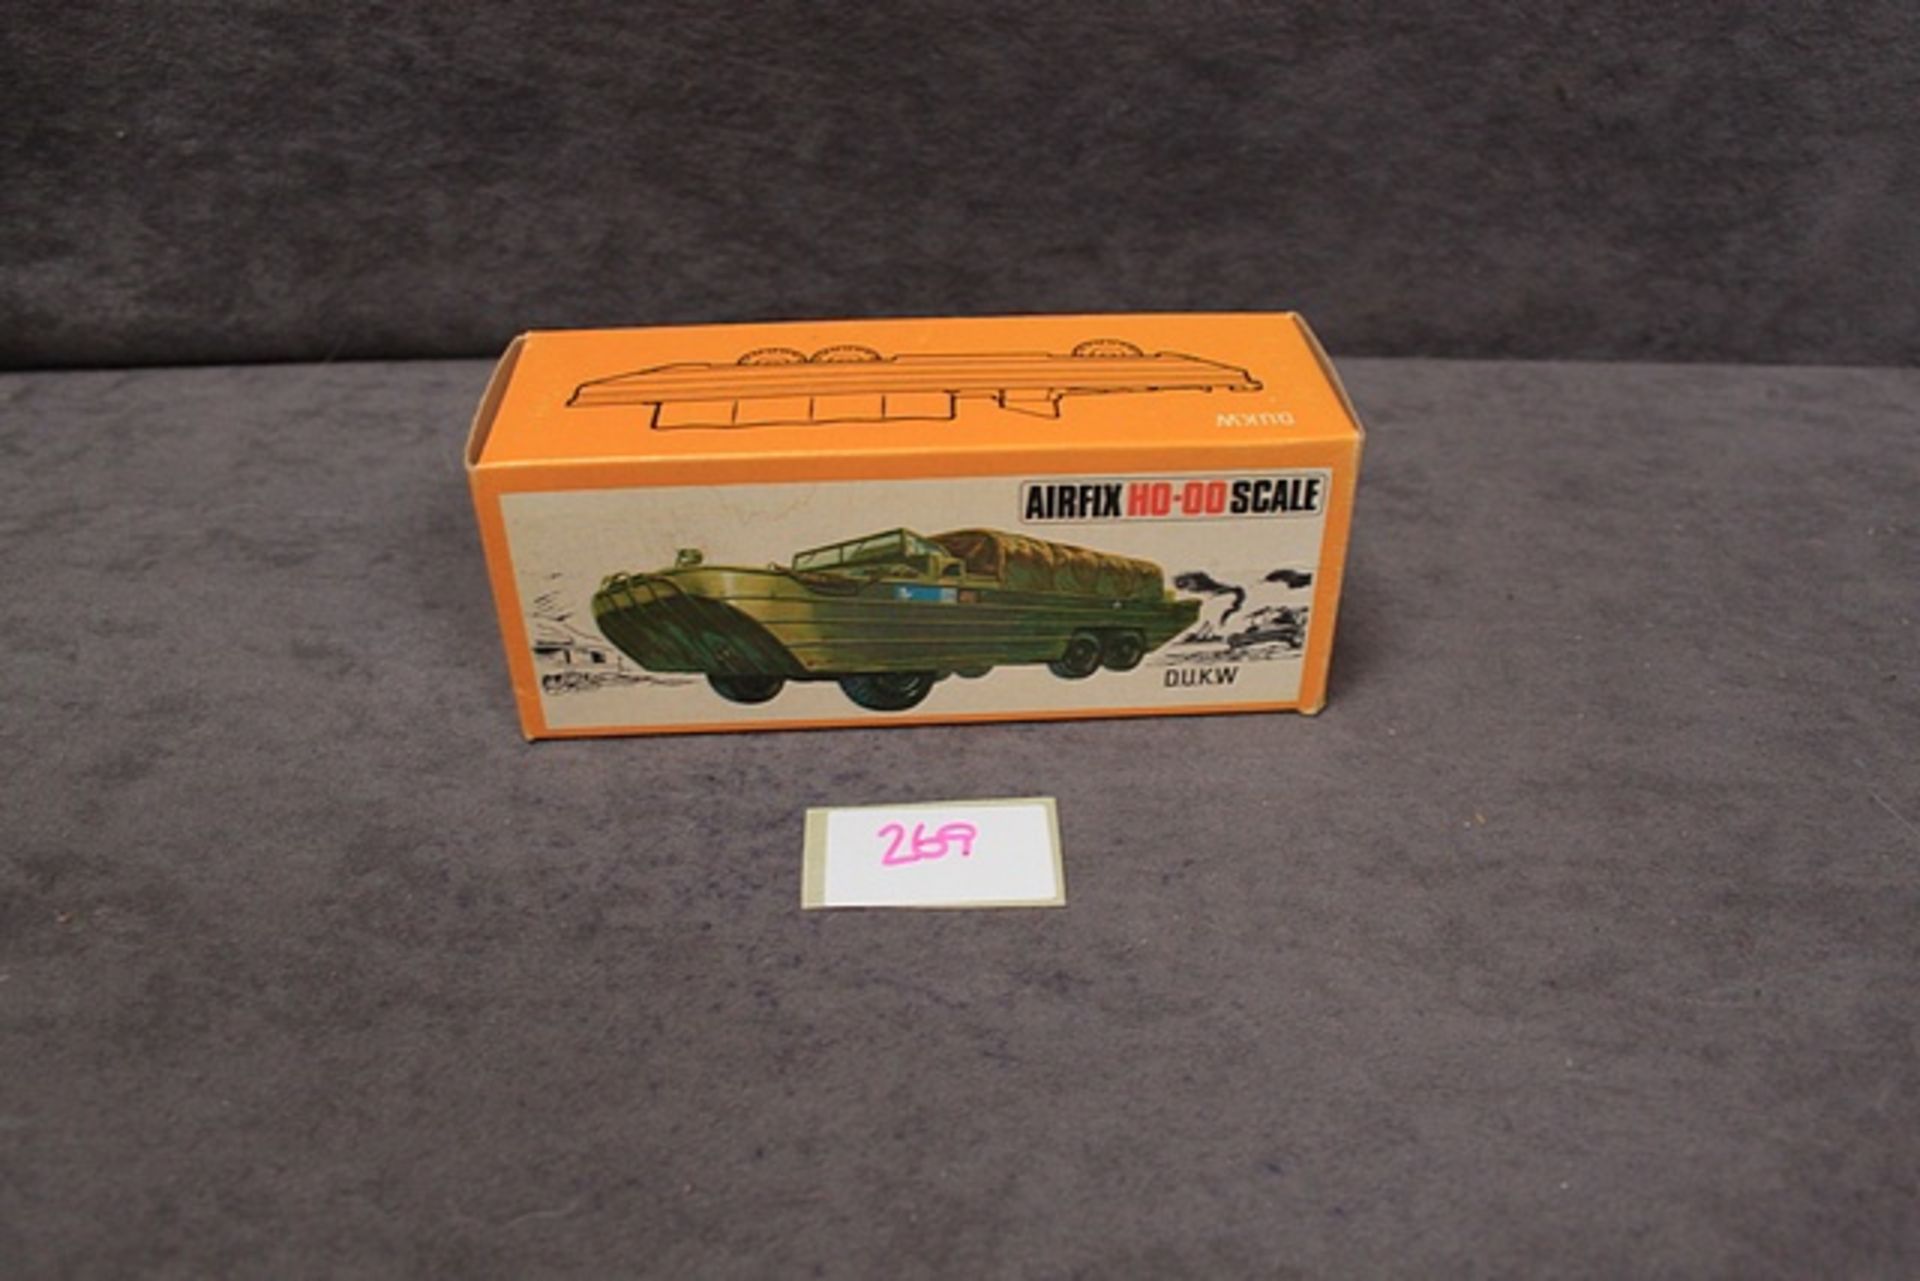 Airfix H0-00 Scale DUKW in box - Image 2 of 2